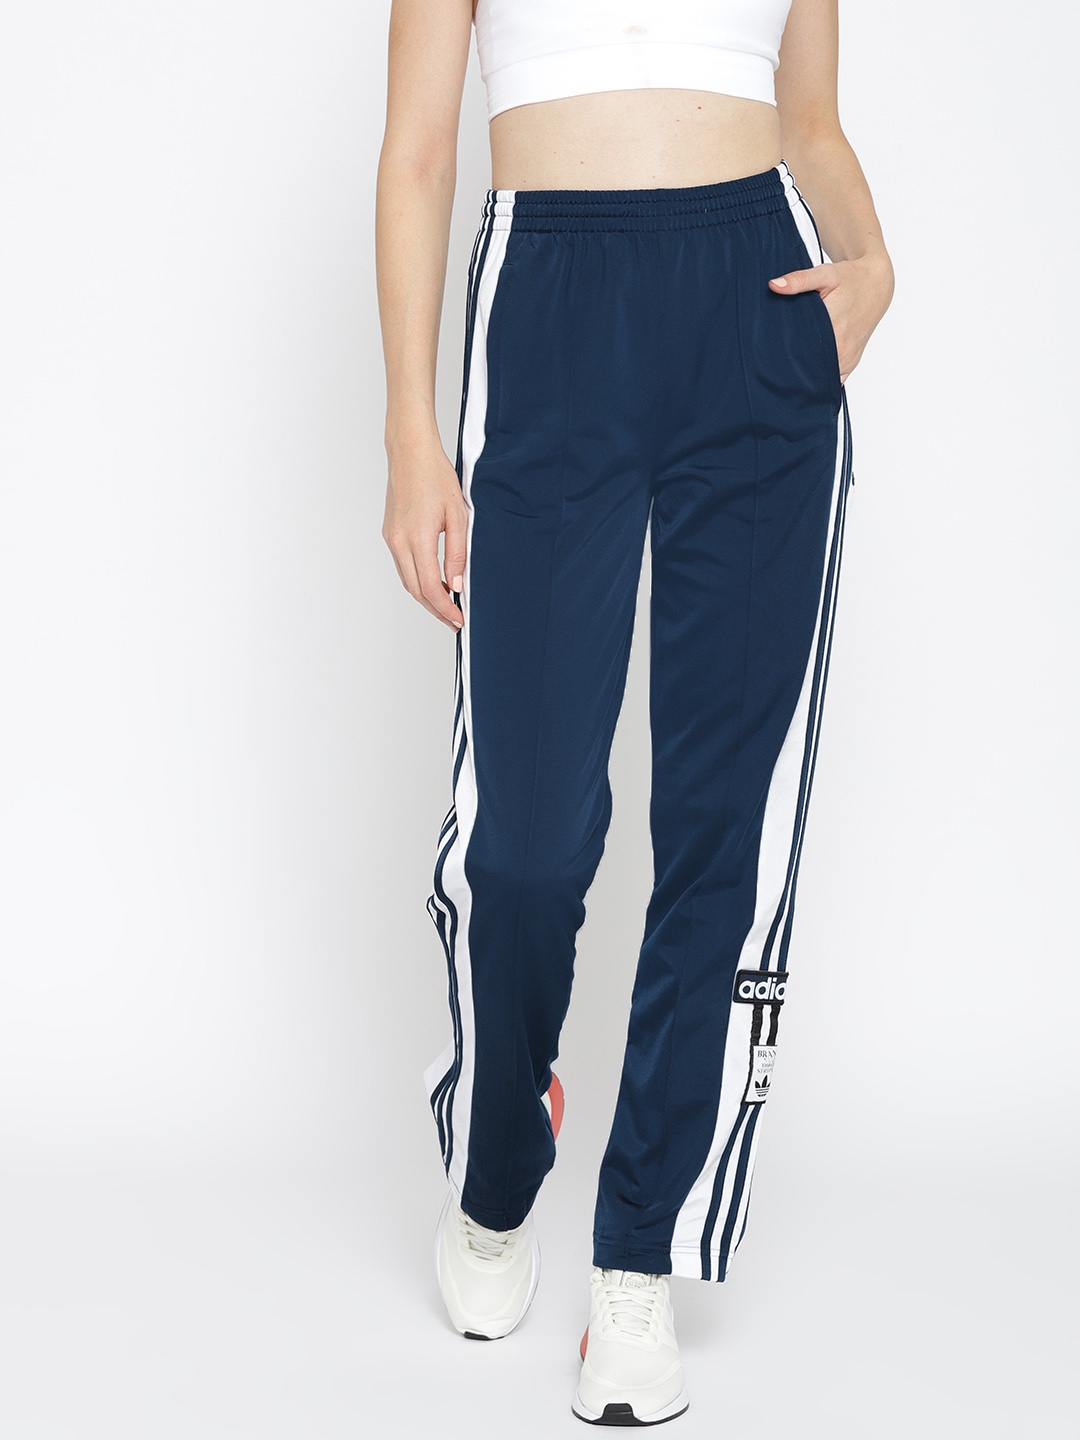 Adidas Tearaway Track Pants  Youll Know Exactly Which Brand Kendall  Jenners Repping When You See Her Outfit  POPSUGAR Fashion Photo 6